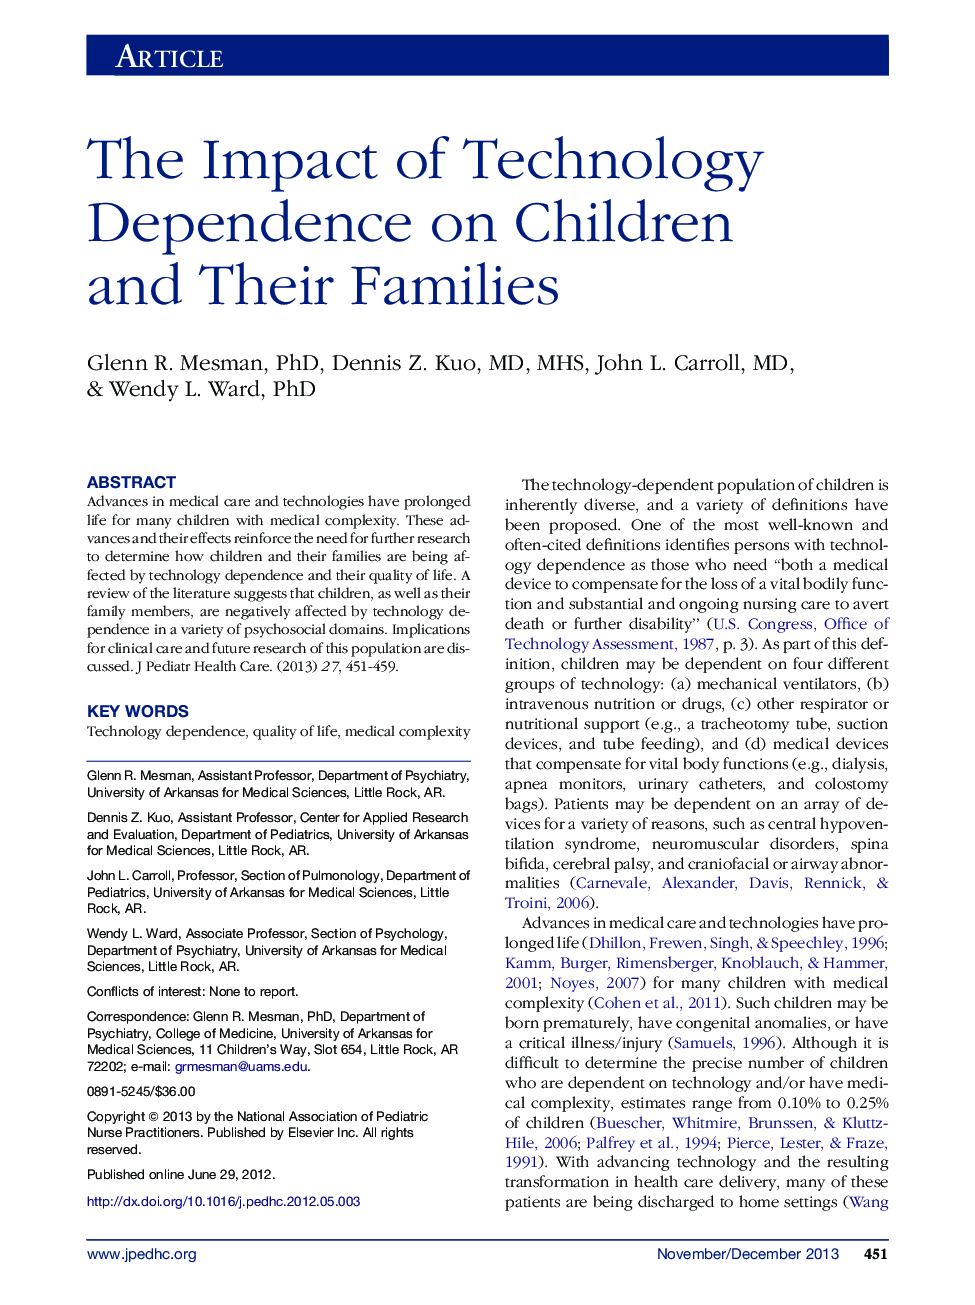 The Impact of Technology Dependence on Children and Their Families 